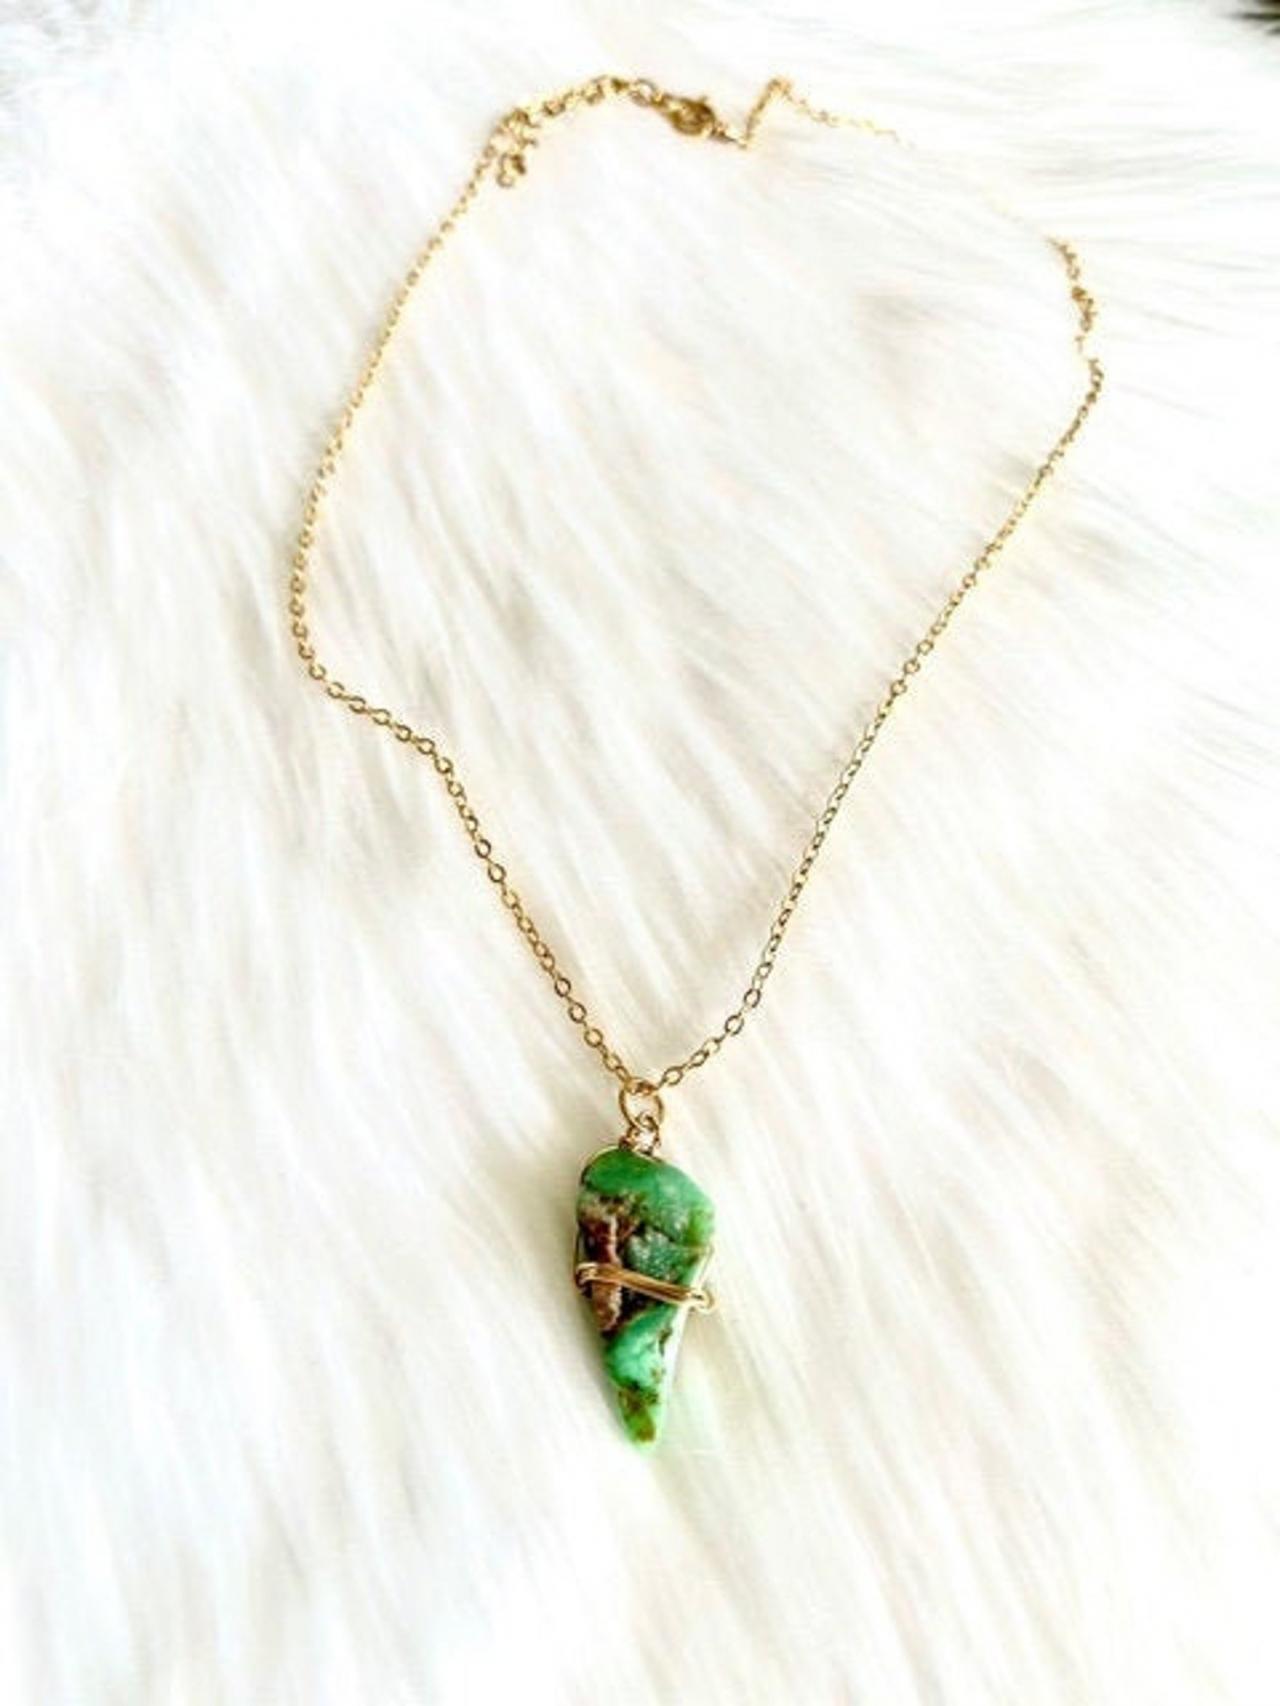 Chrysoprase Crystal Necklace; Raw Chrysoprase; Crystal Jewelry; 14k Gold Filled; Tumbled Chrysoprase; Healing Jewelry